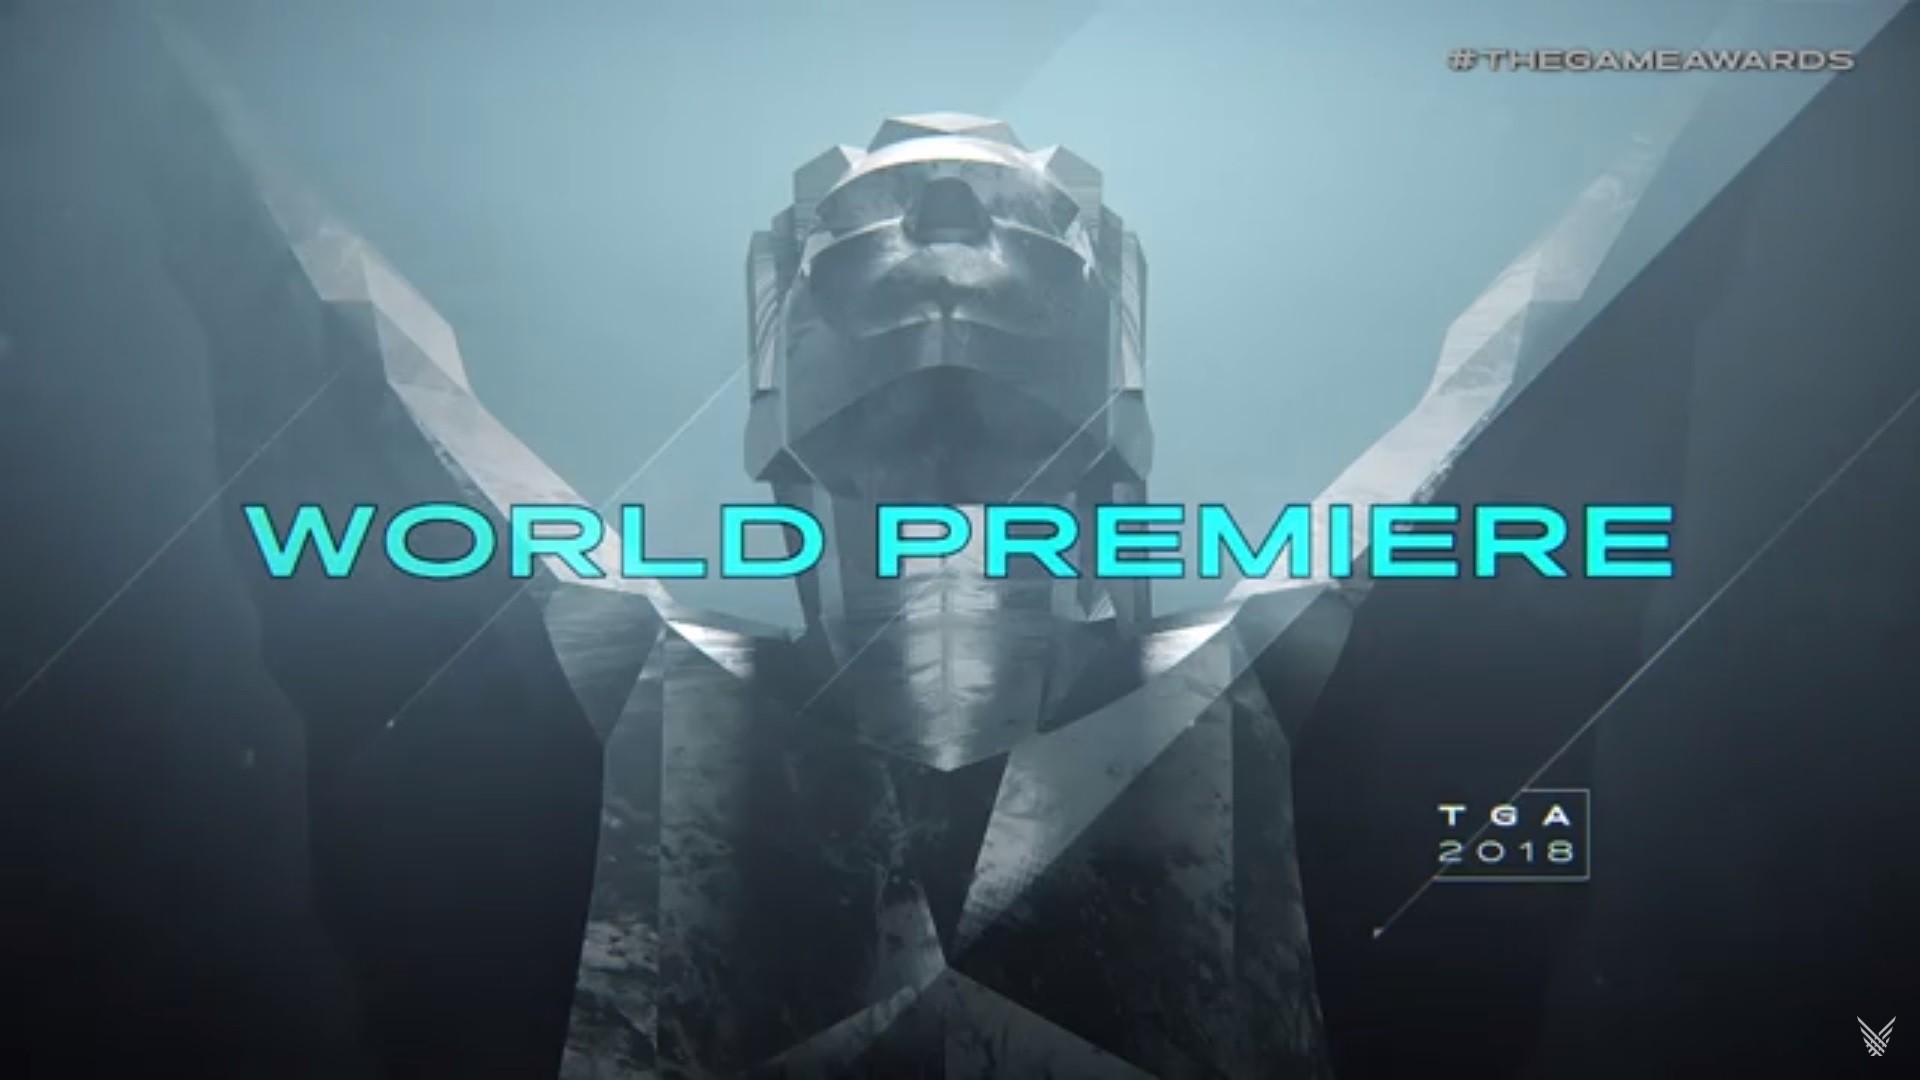 The Game Awards world premiere